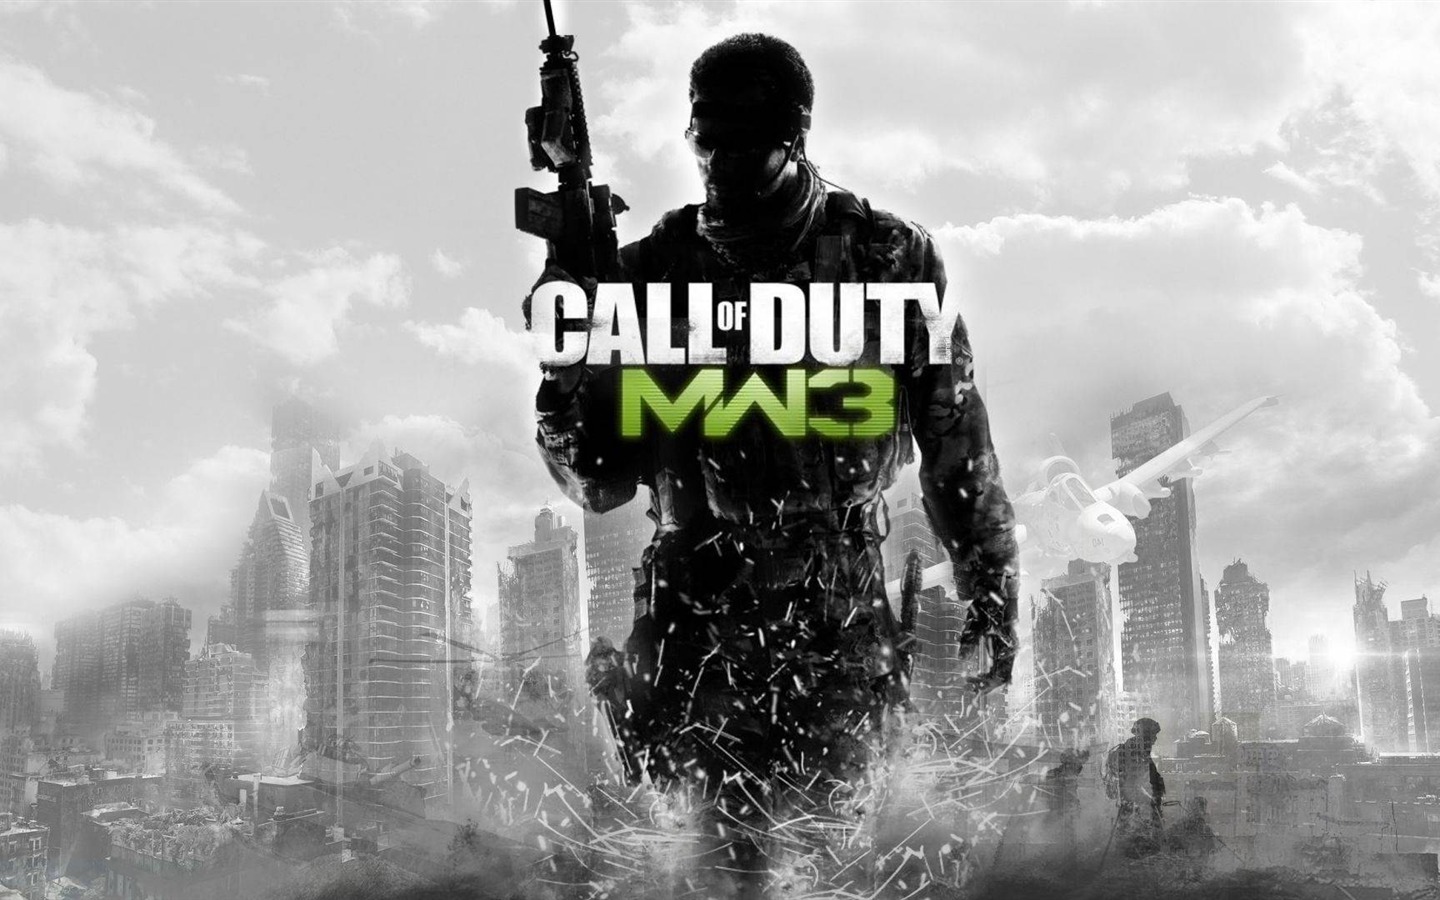 Call of Duty: MW3 wallpapers HD #1 - 1440x900